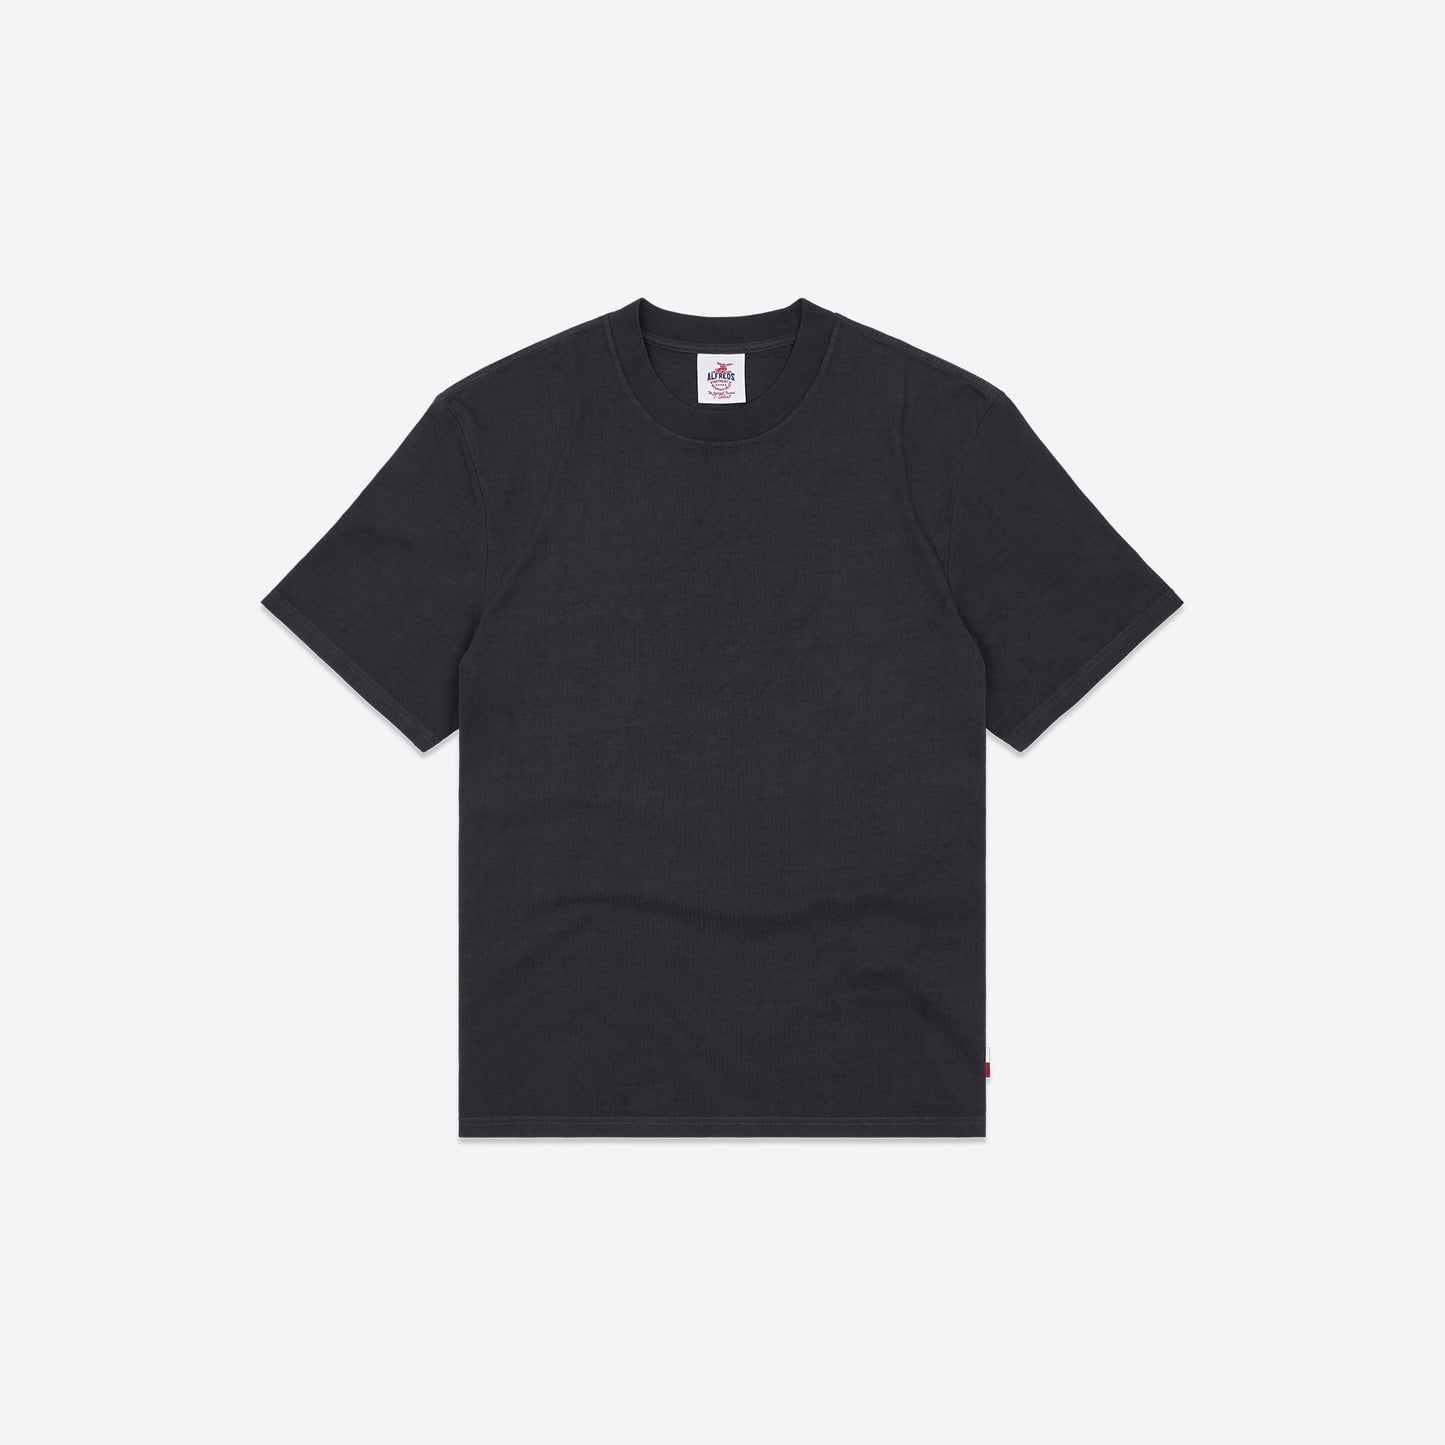 Trusted Tee - Washed Black